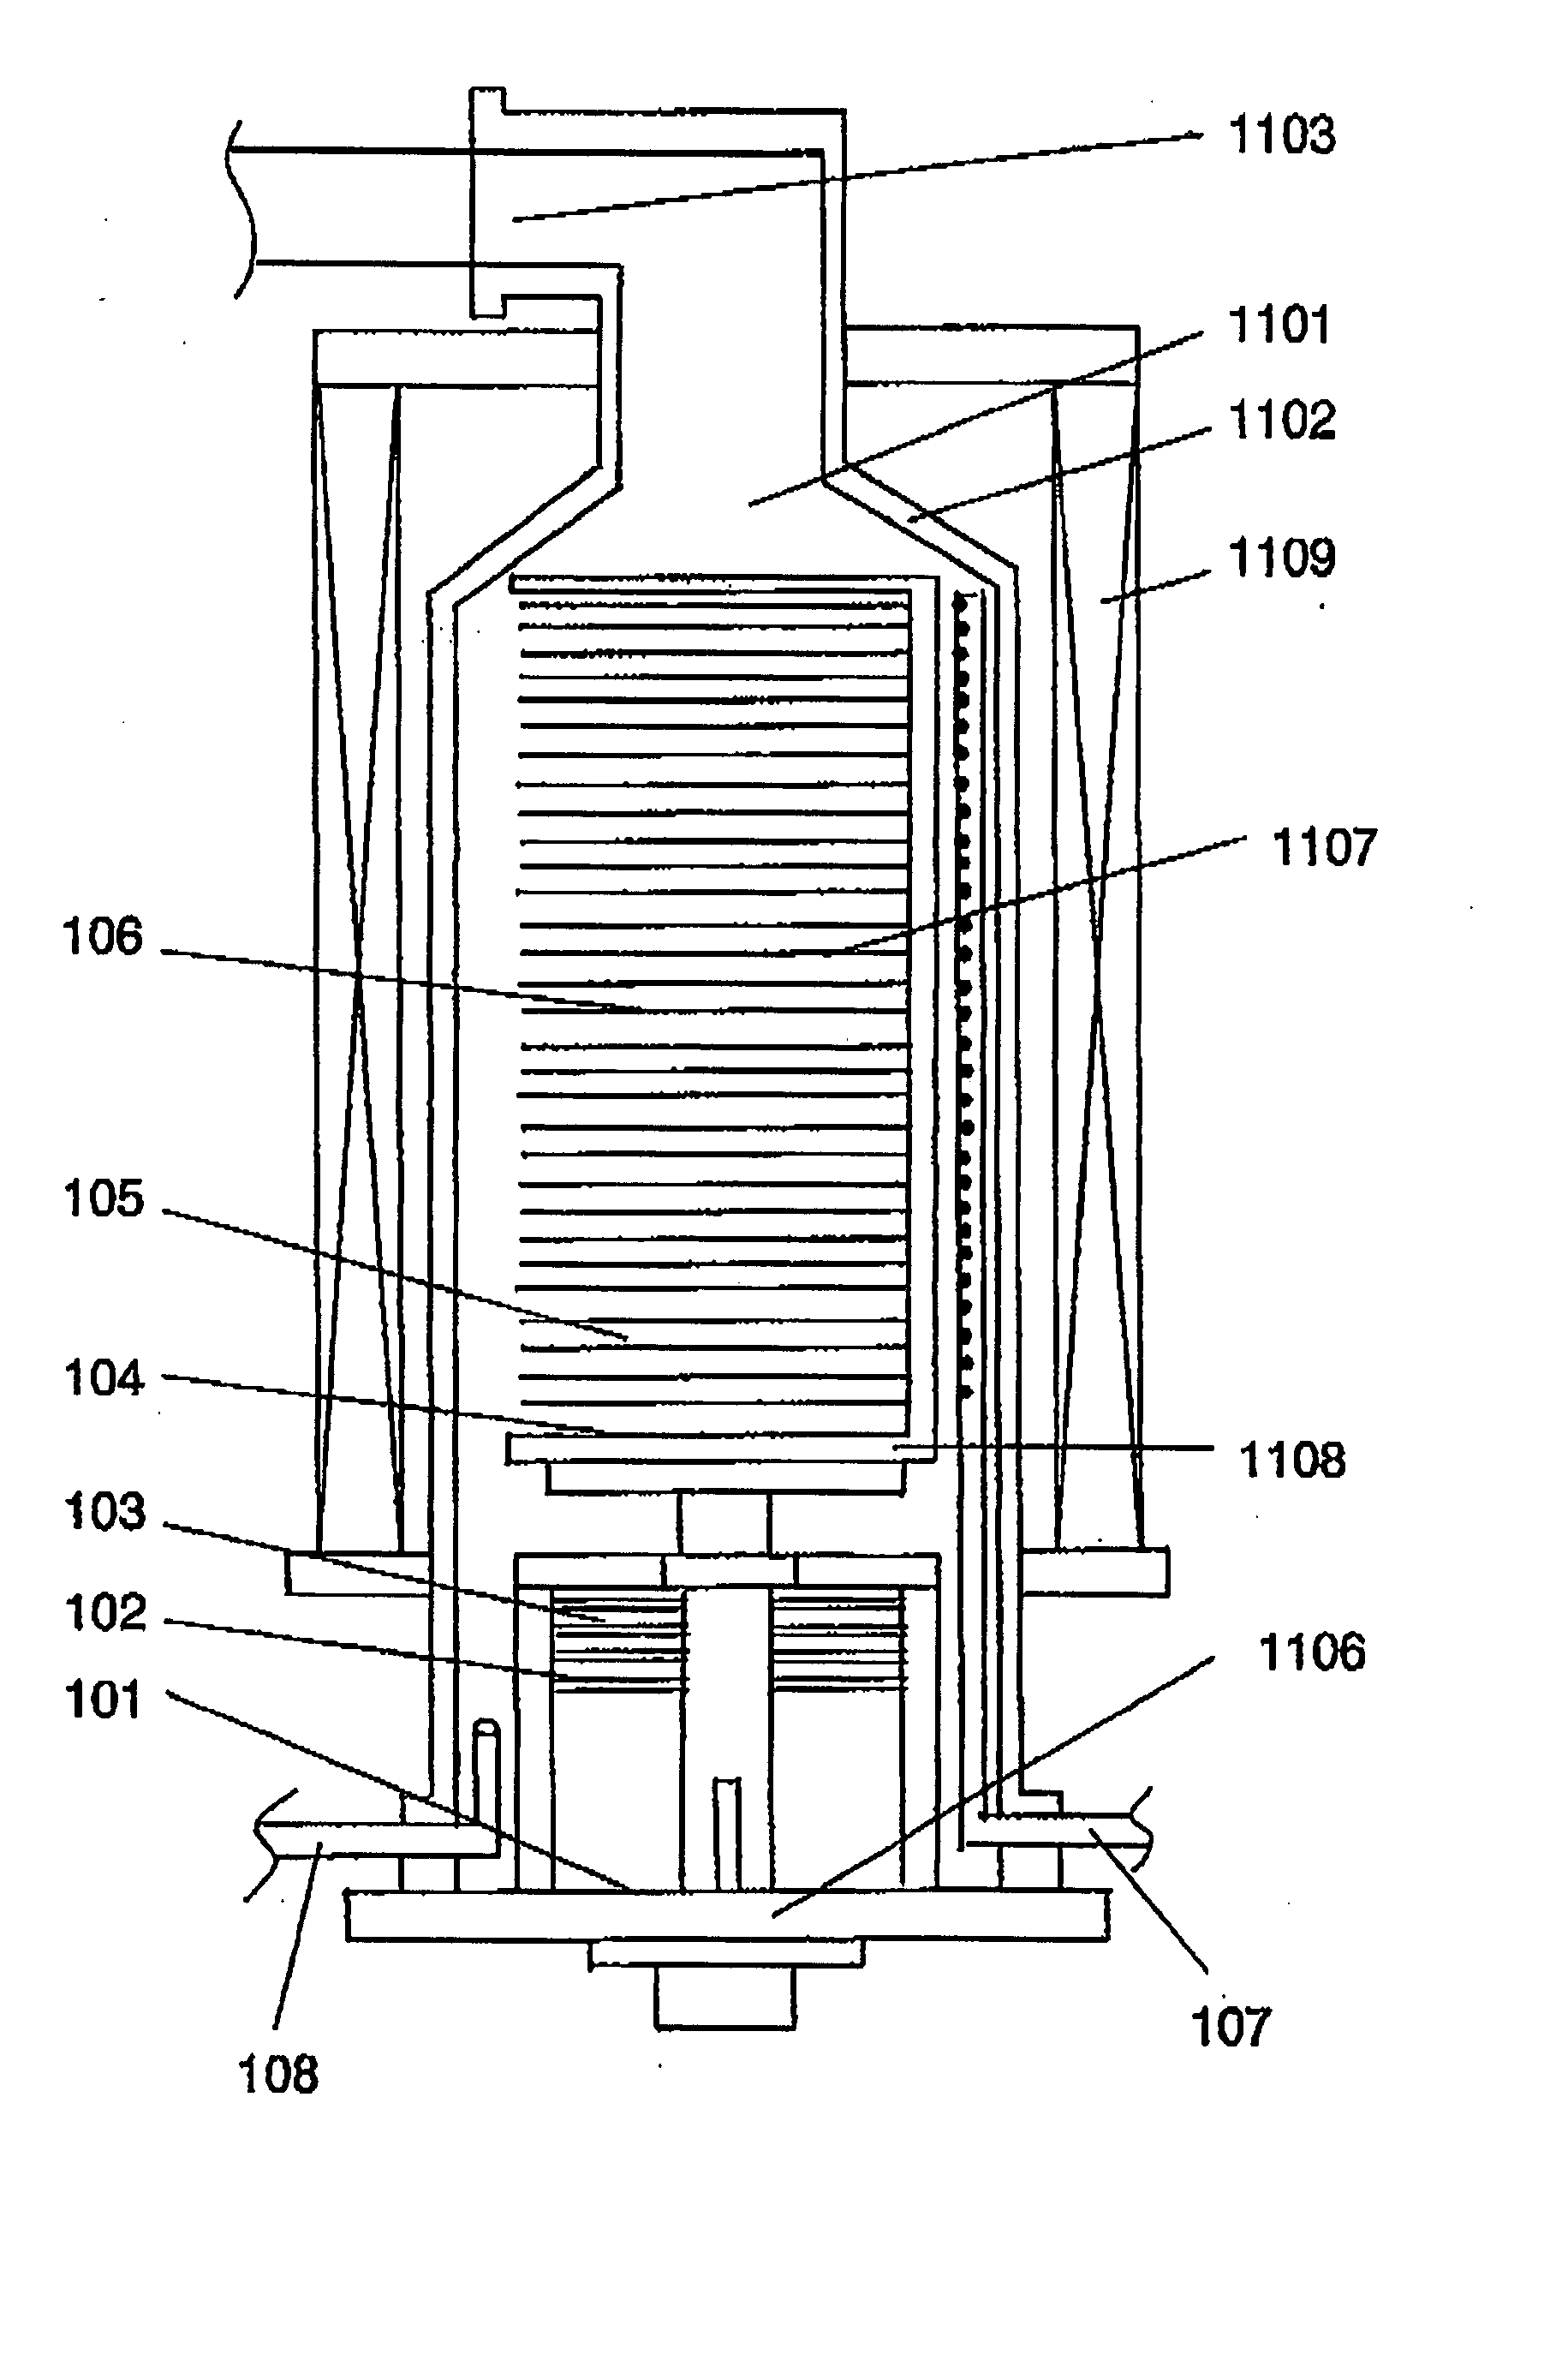 Semiconductor manufacturing system